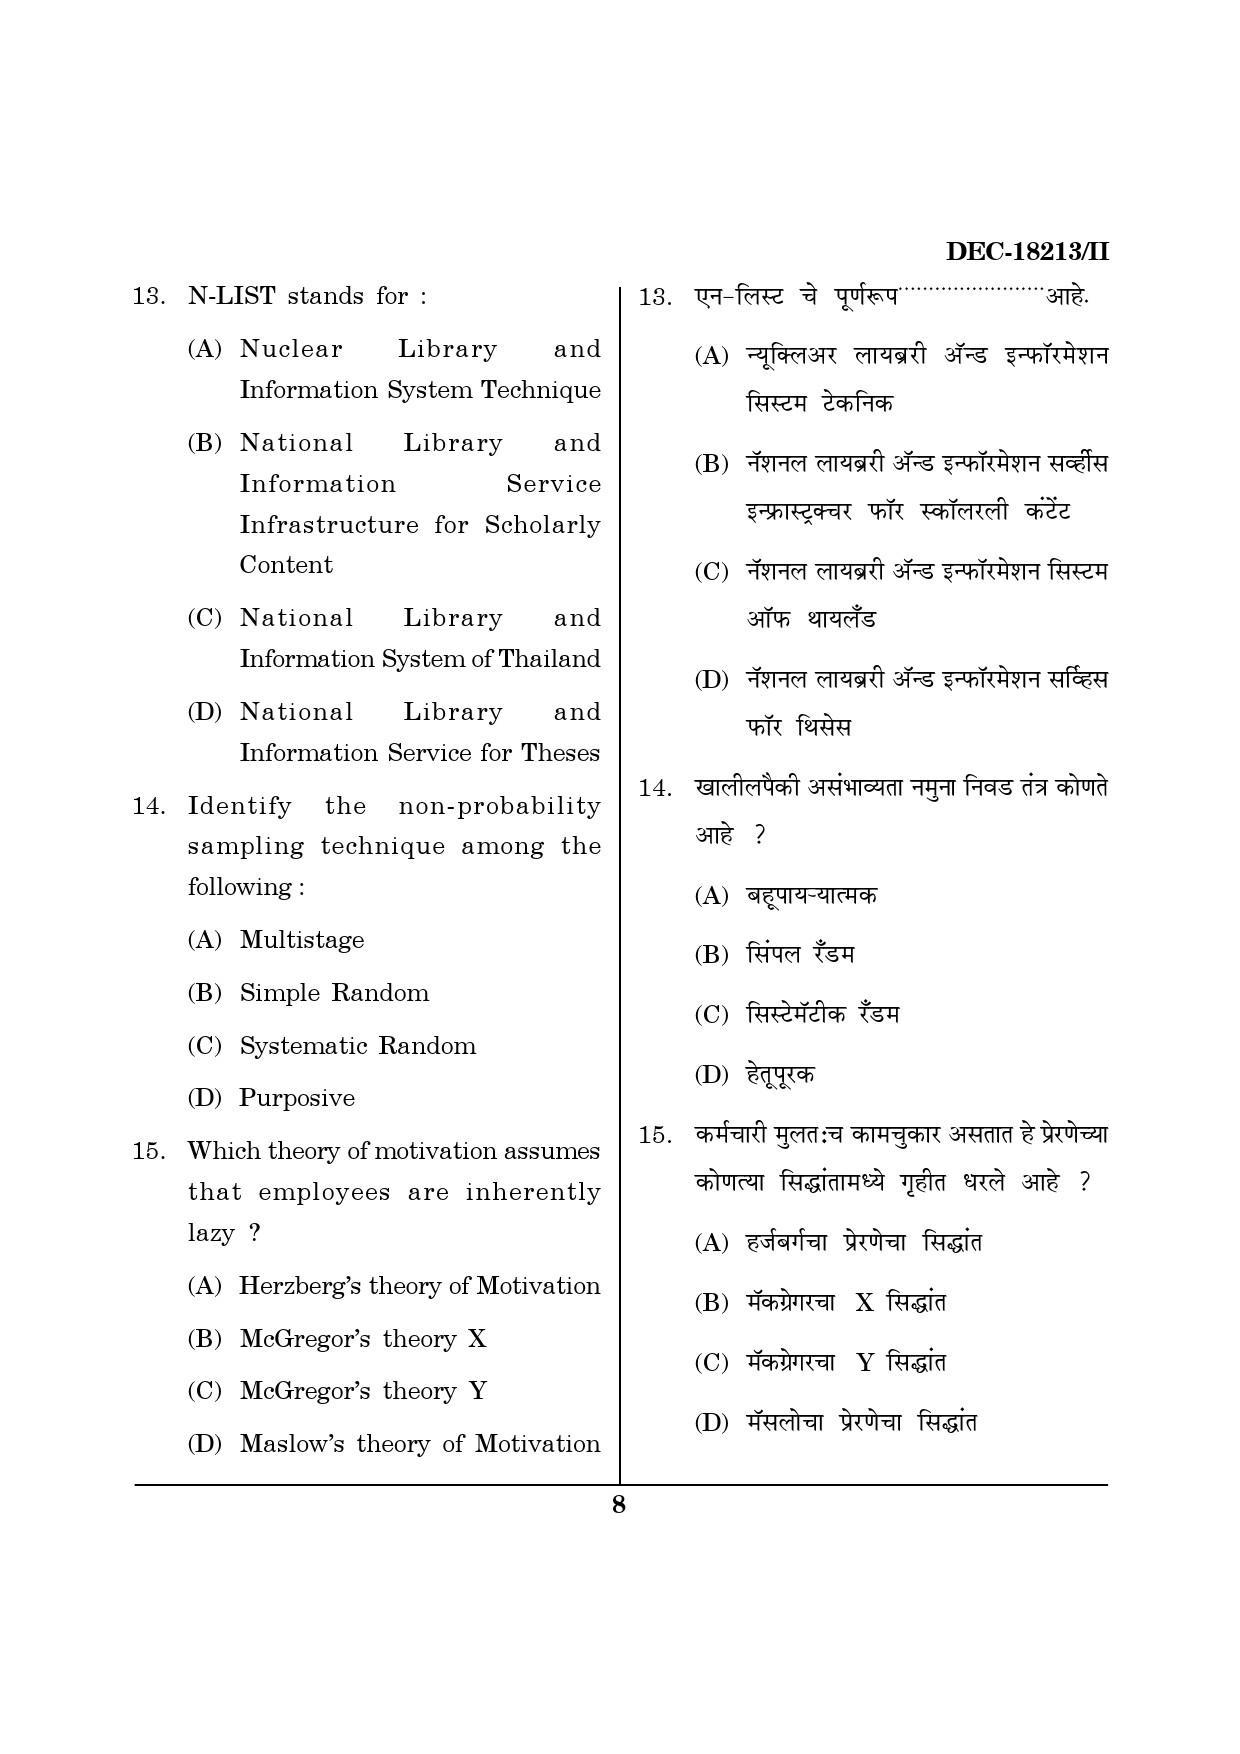 Maharashtra SET Library Information Science Question Paper II December 2013 7